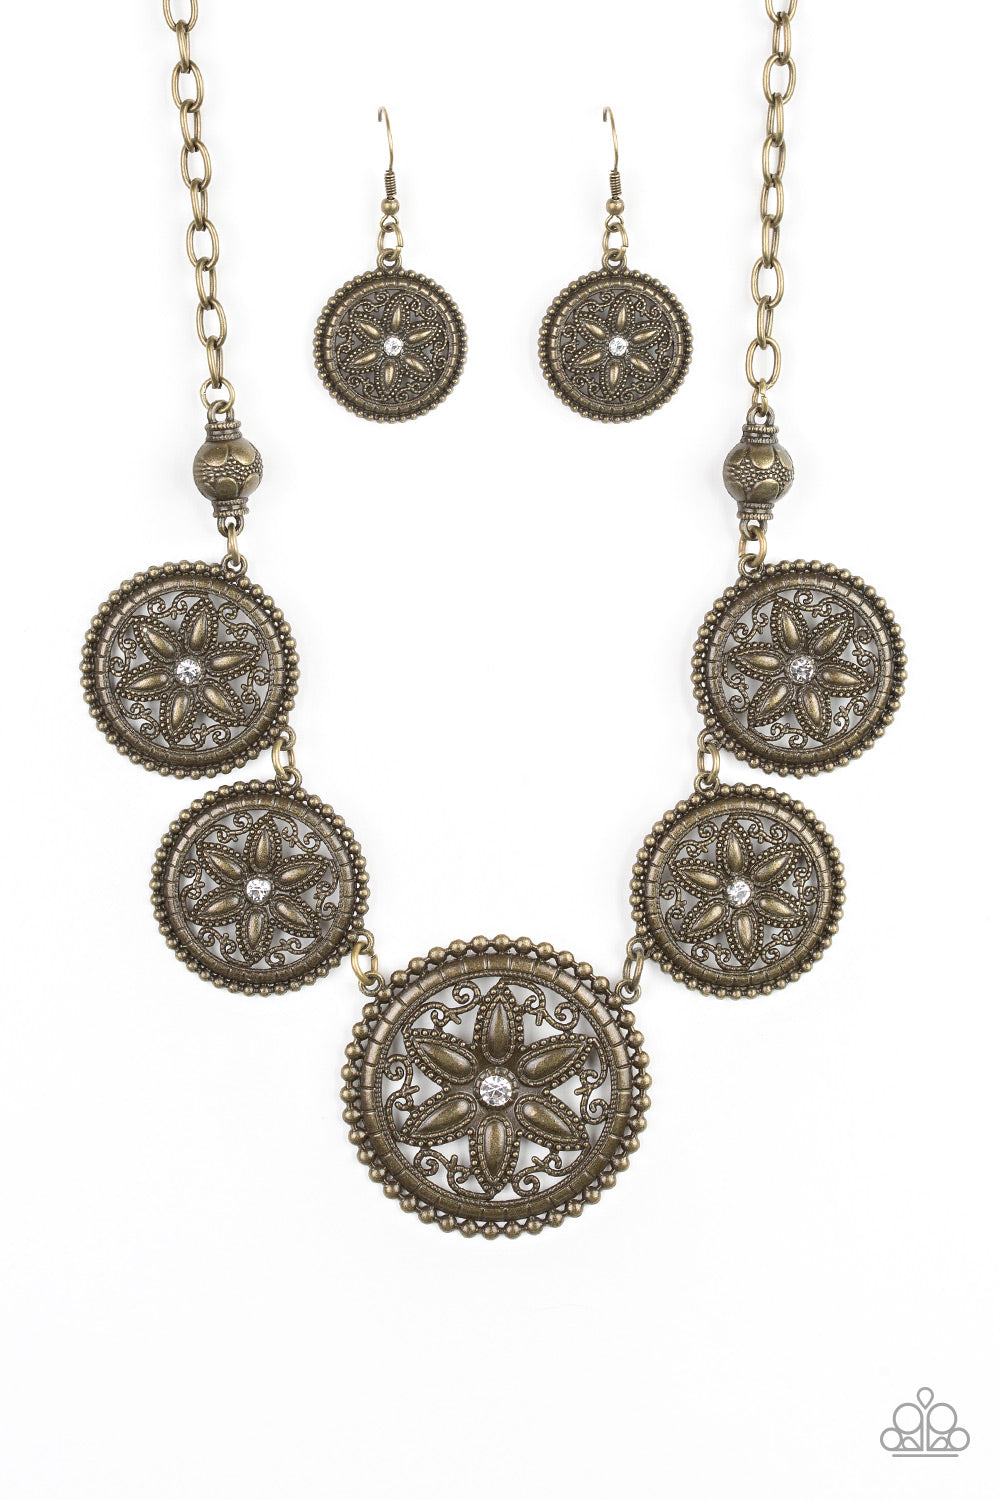 Paparazzi Accessories - Written in the Star Lilies - Brass Necklace - TheMasterCollection